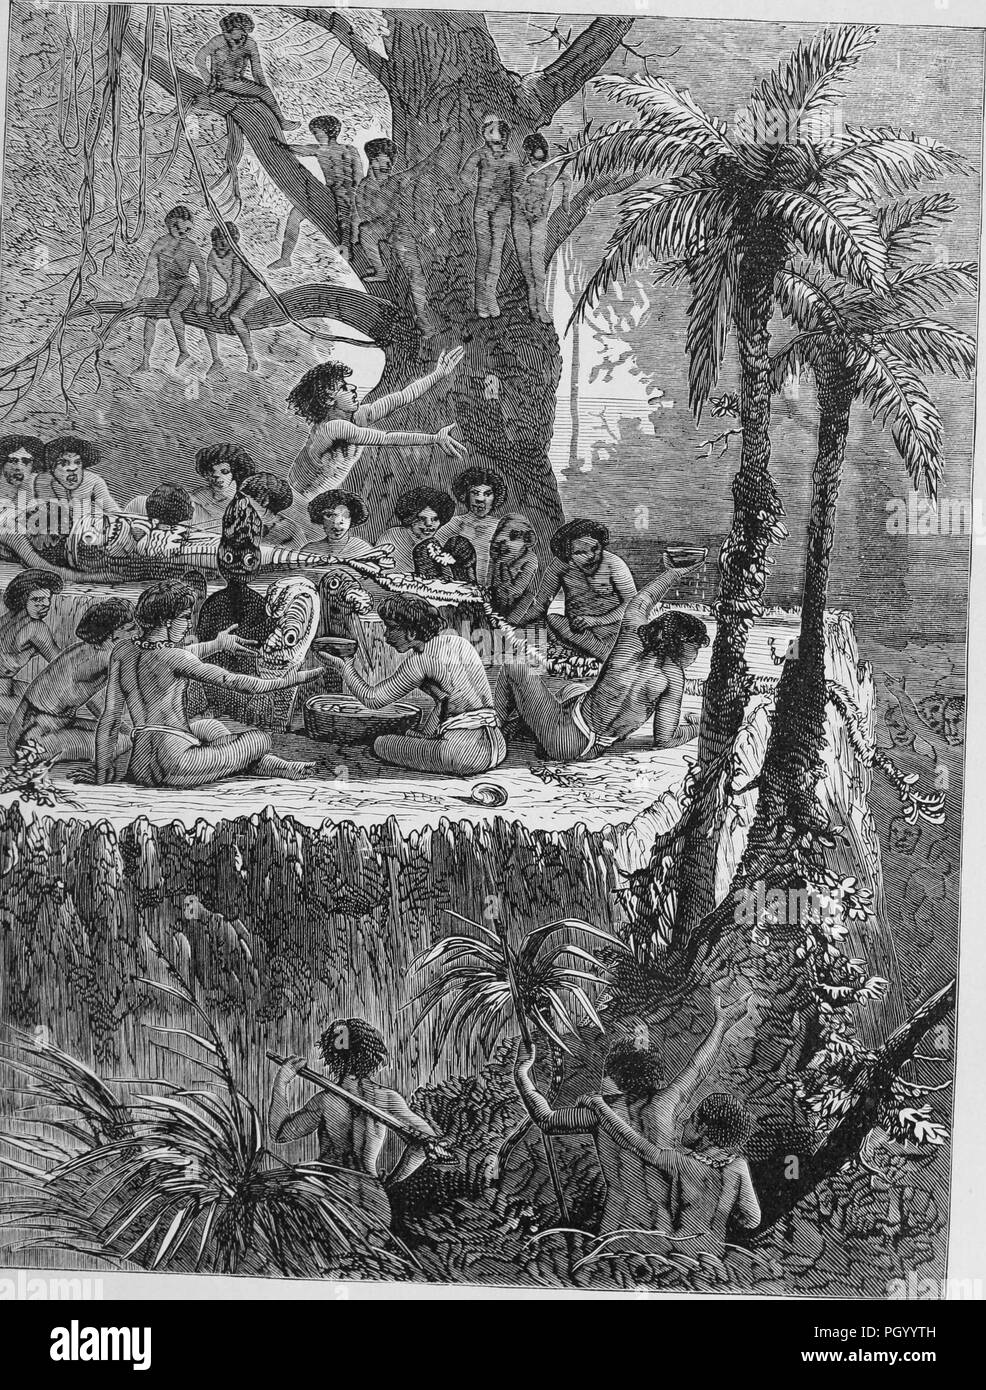 Black and white vintage print, depicting a group of male Society Islanders, wearing loincloths, and seated on a low cliff with a large tree in the background, engaged in a ceremony to dress or beautify wooden effigies of Gods, one of which may be Oro, the God of War, published in John George Wood's volume 'The uncivilized races of men in all countries of the world, being a comprehensive account of their manners and customs, and of their physical, social, mental, moral and religious characteristics', 1877. Courtesy Internet Archive. () Stock Photo